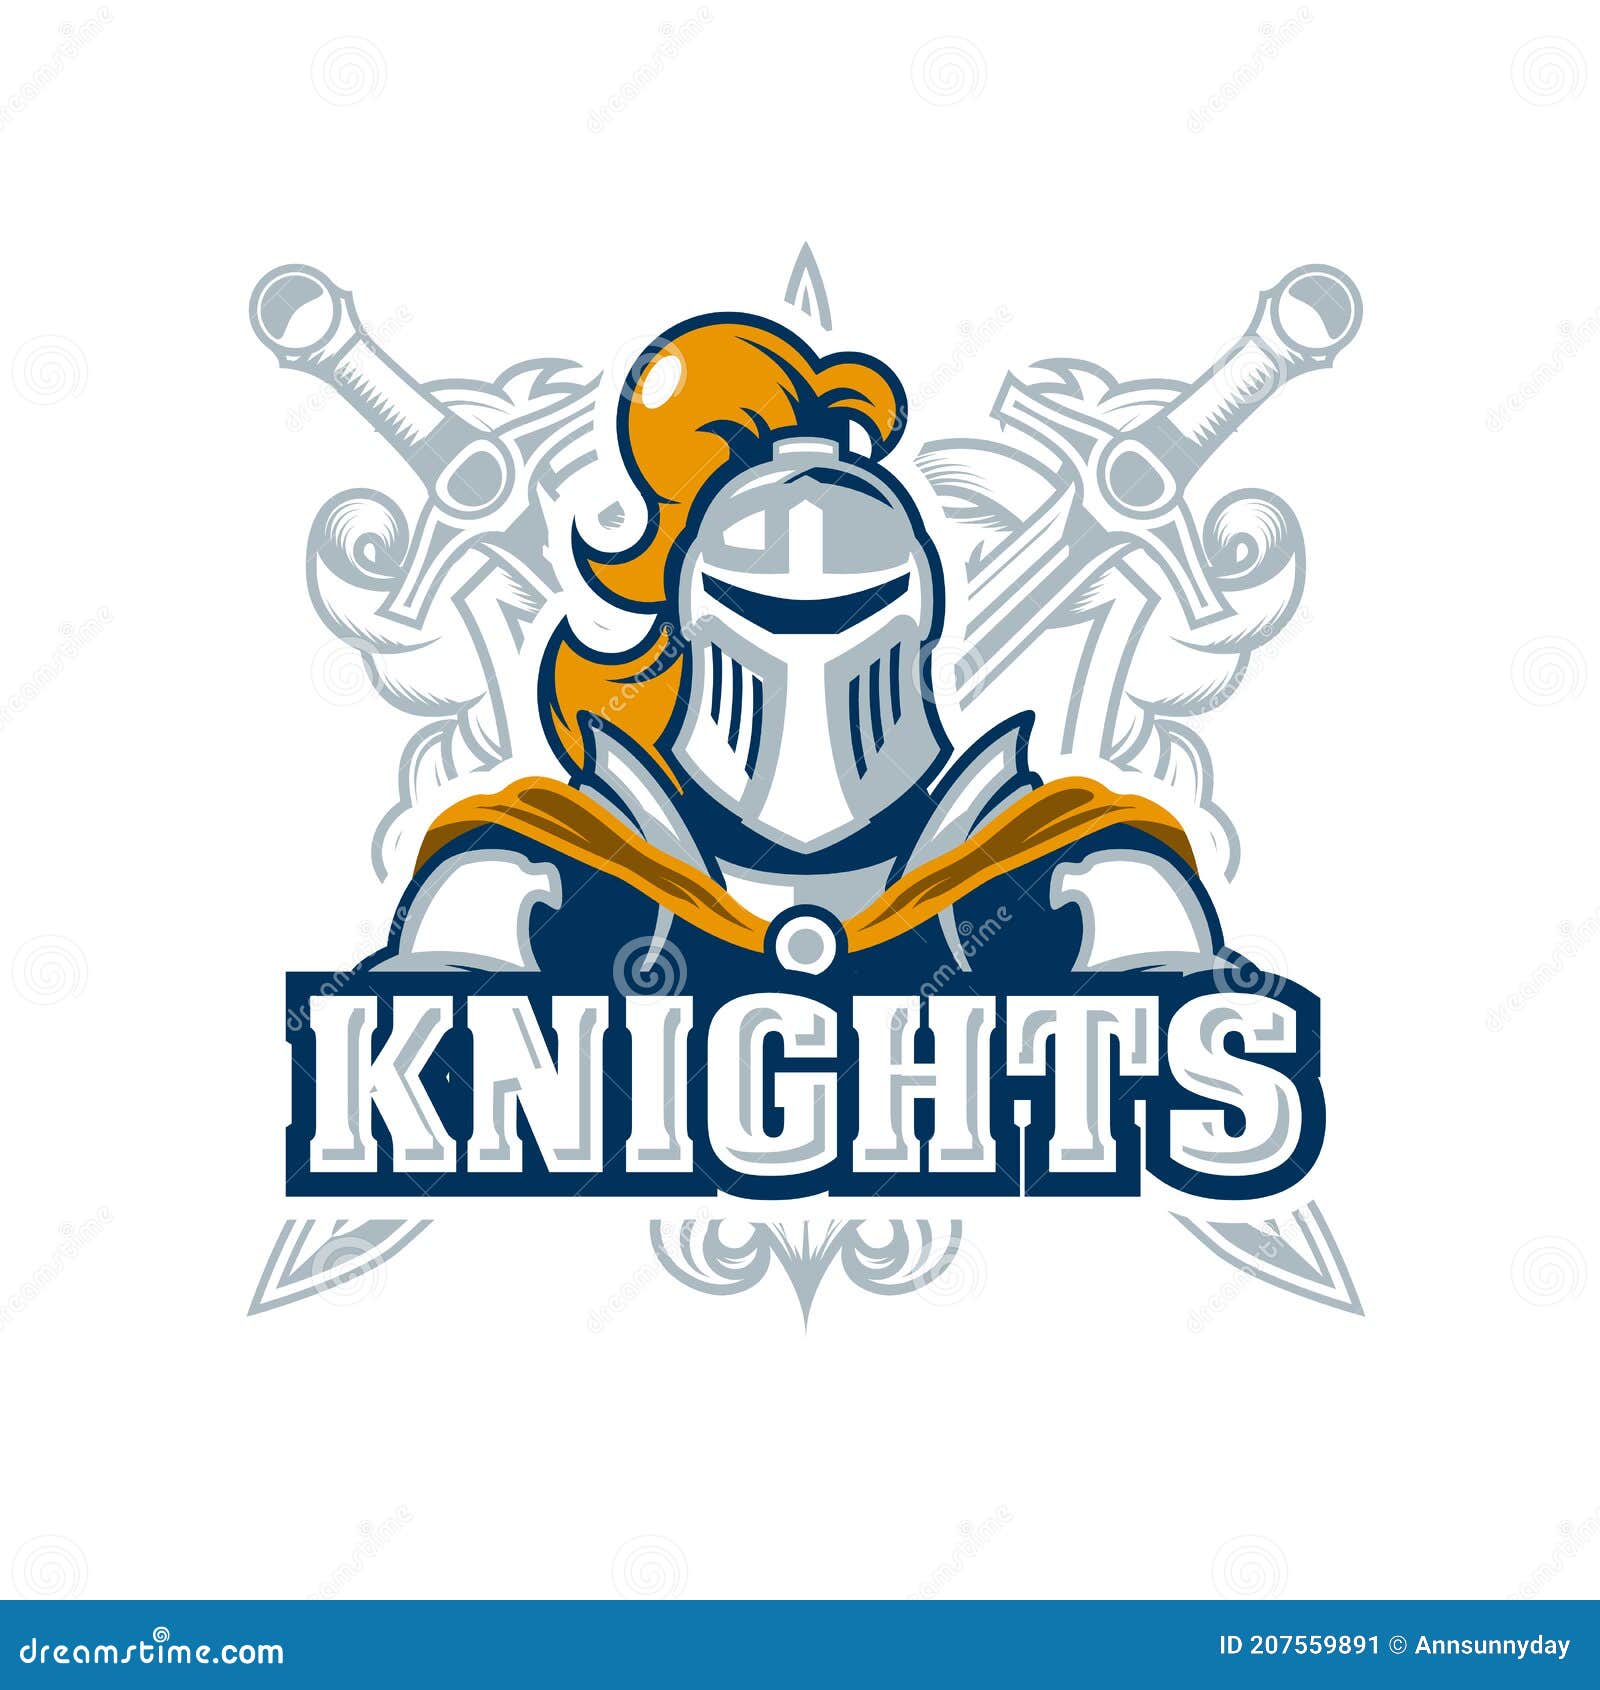 emblem with knight in armor, chivalry logo with paladin and swords, template for a sport team